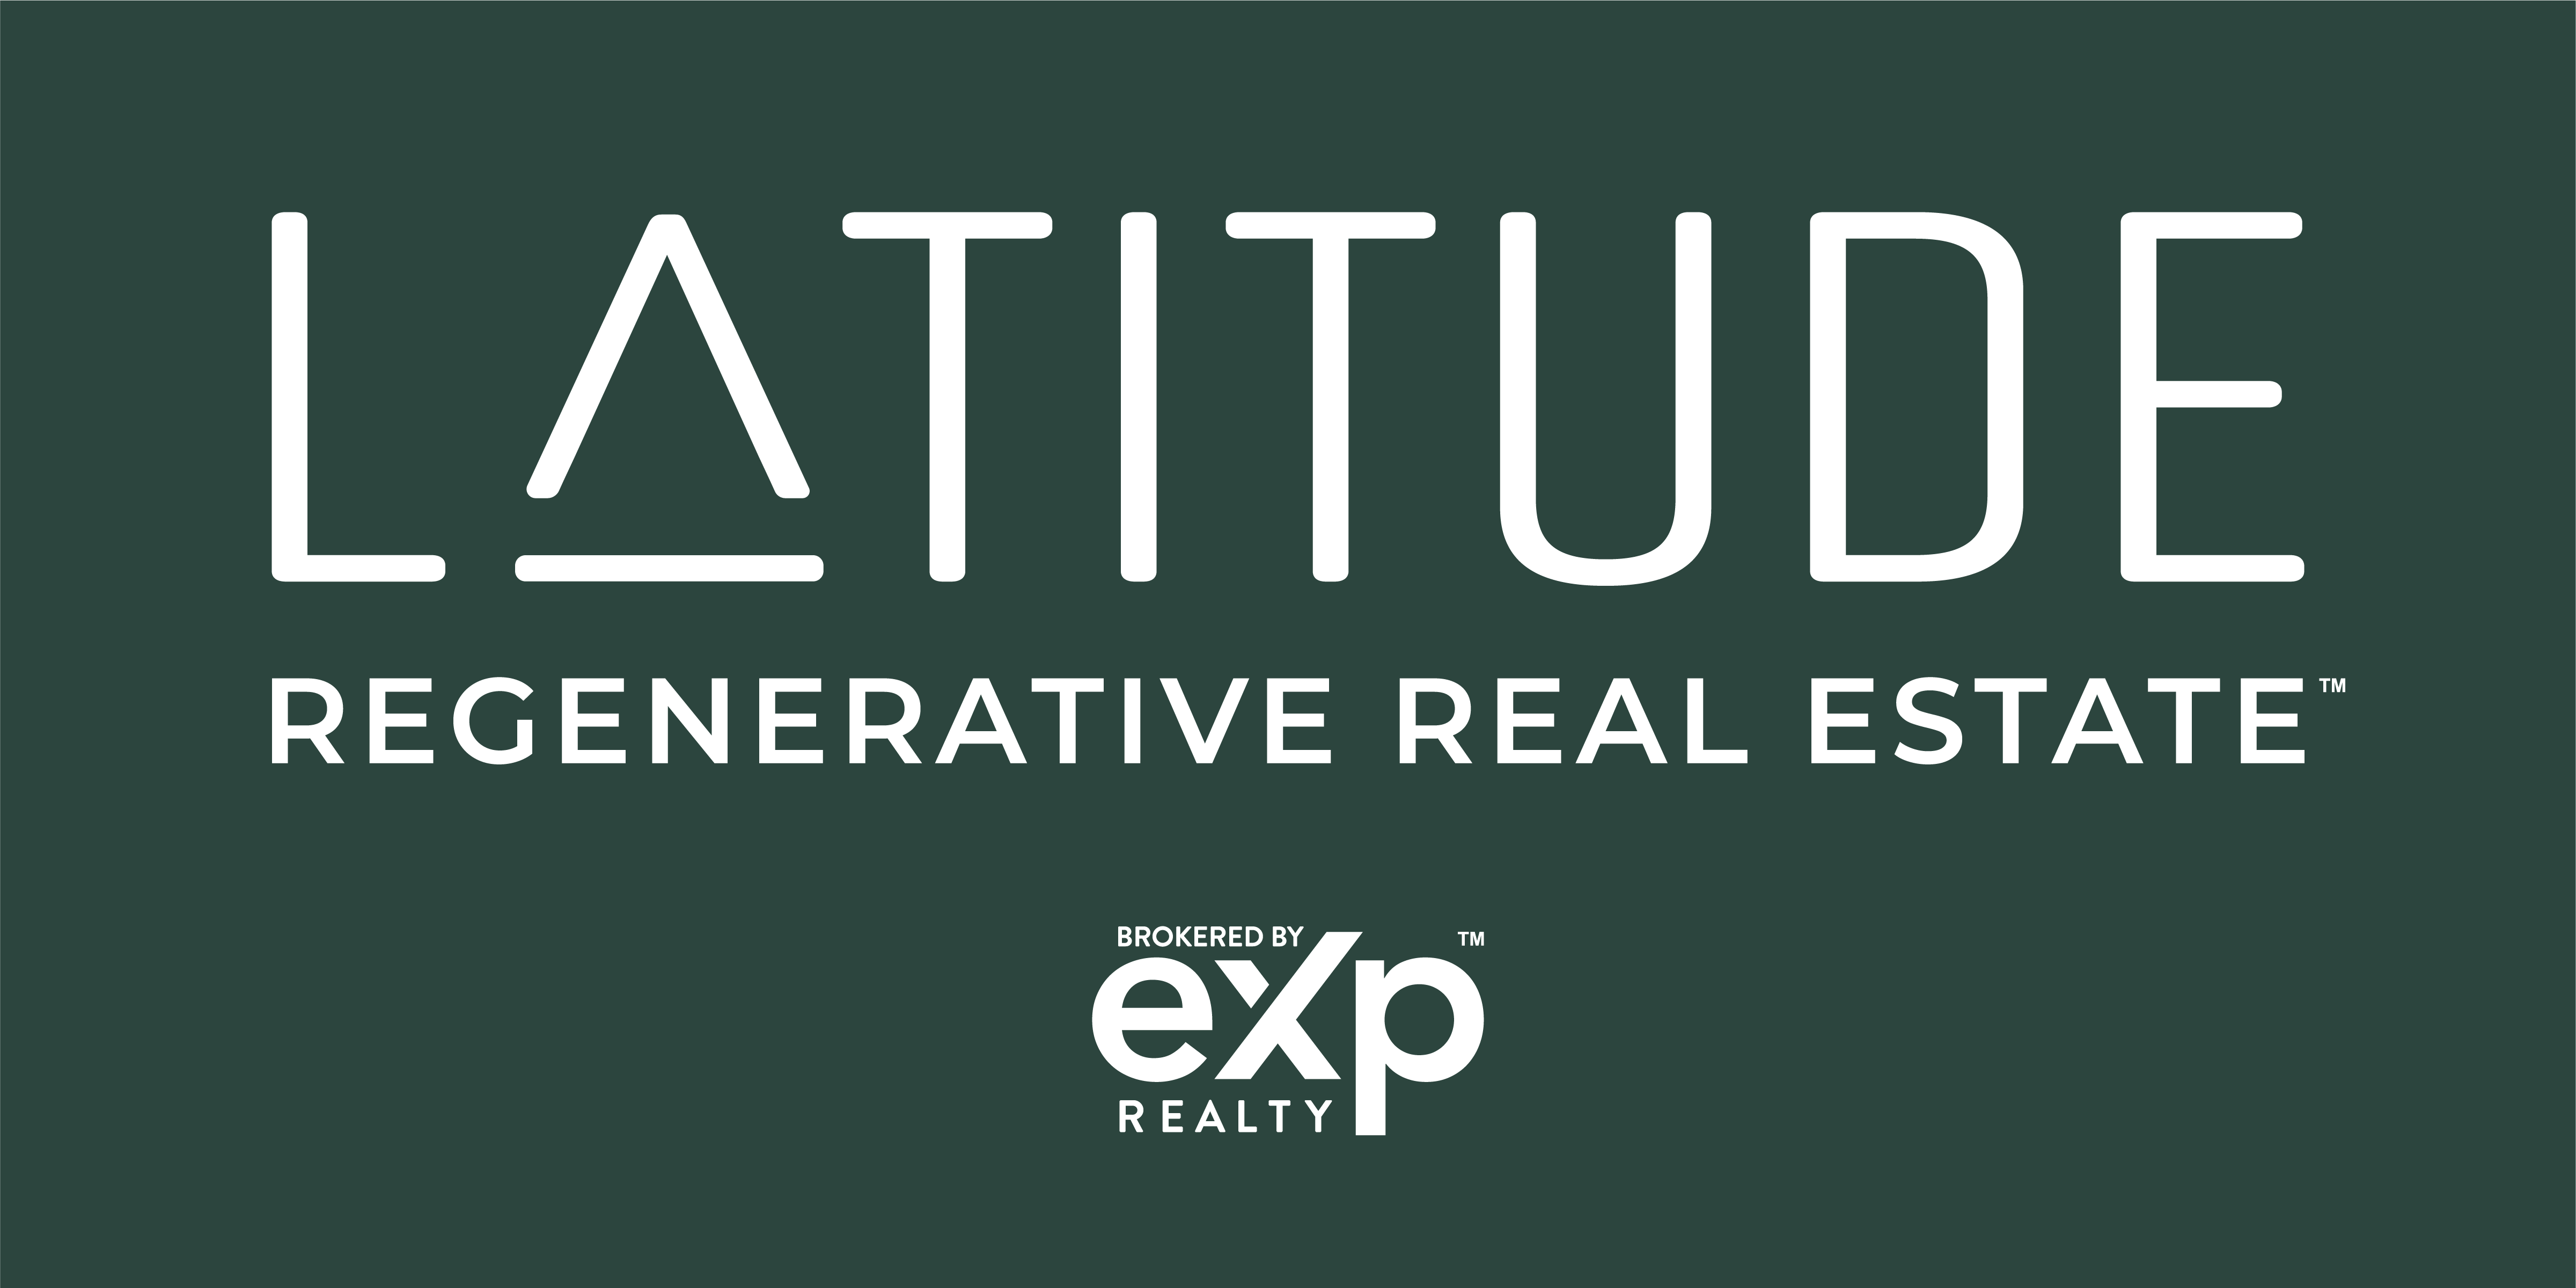 Nation Regenerative Real Estate Brand Launches into the Seattle Region